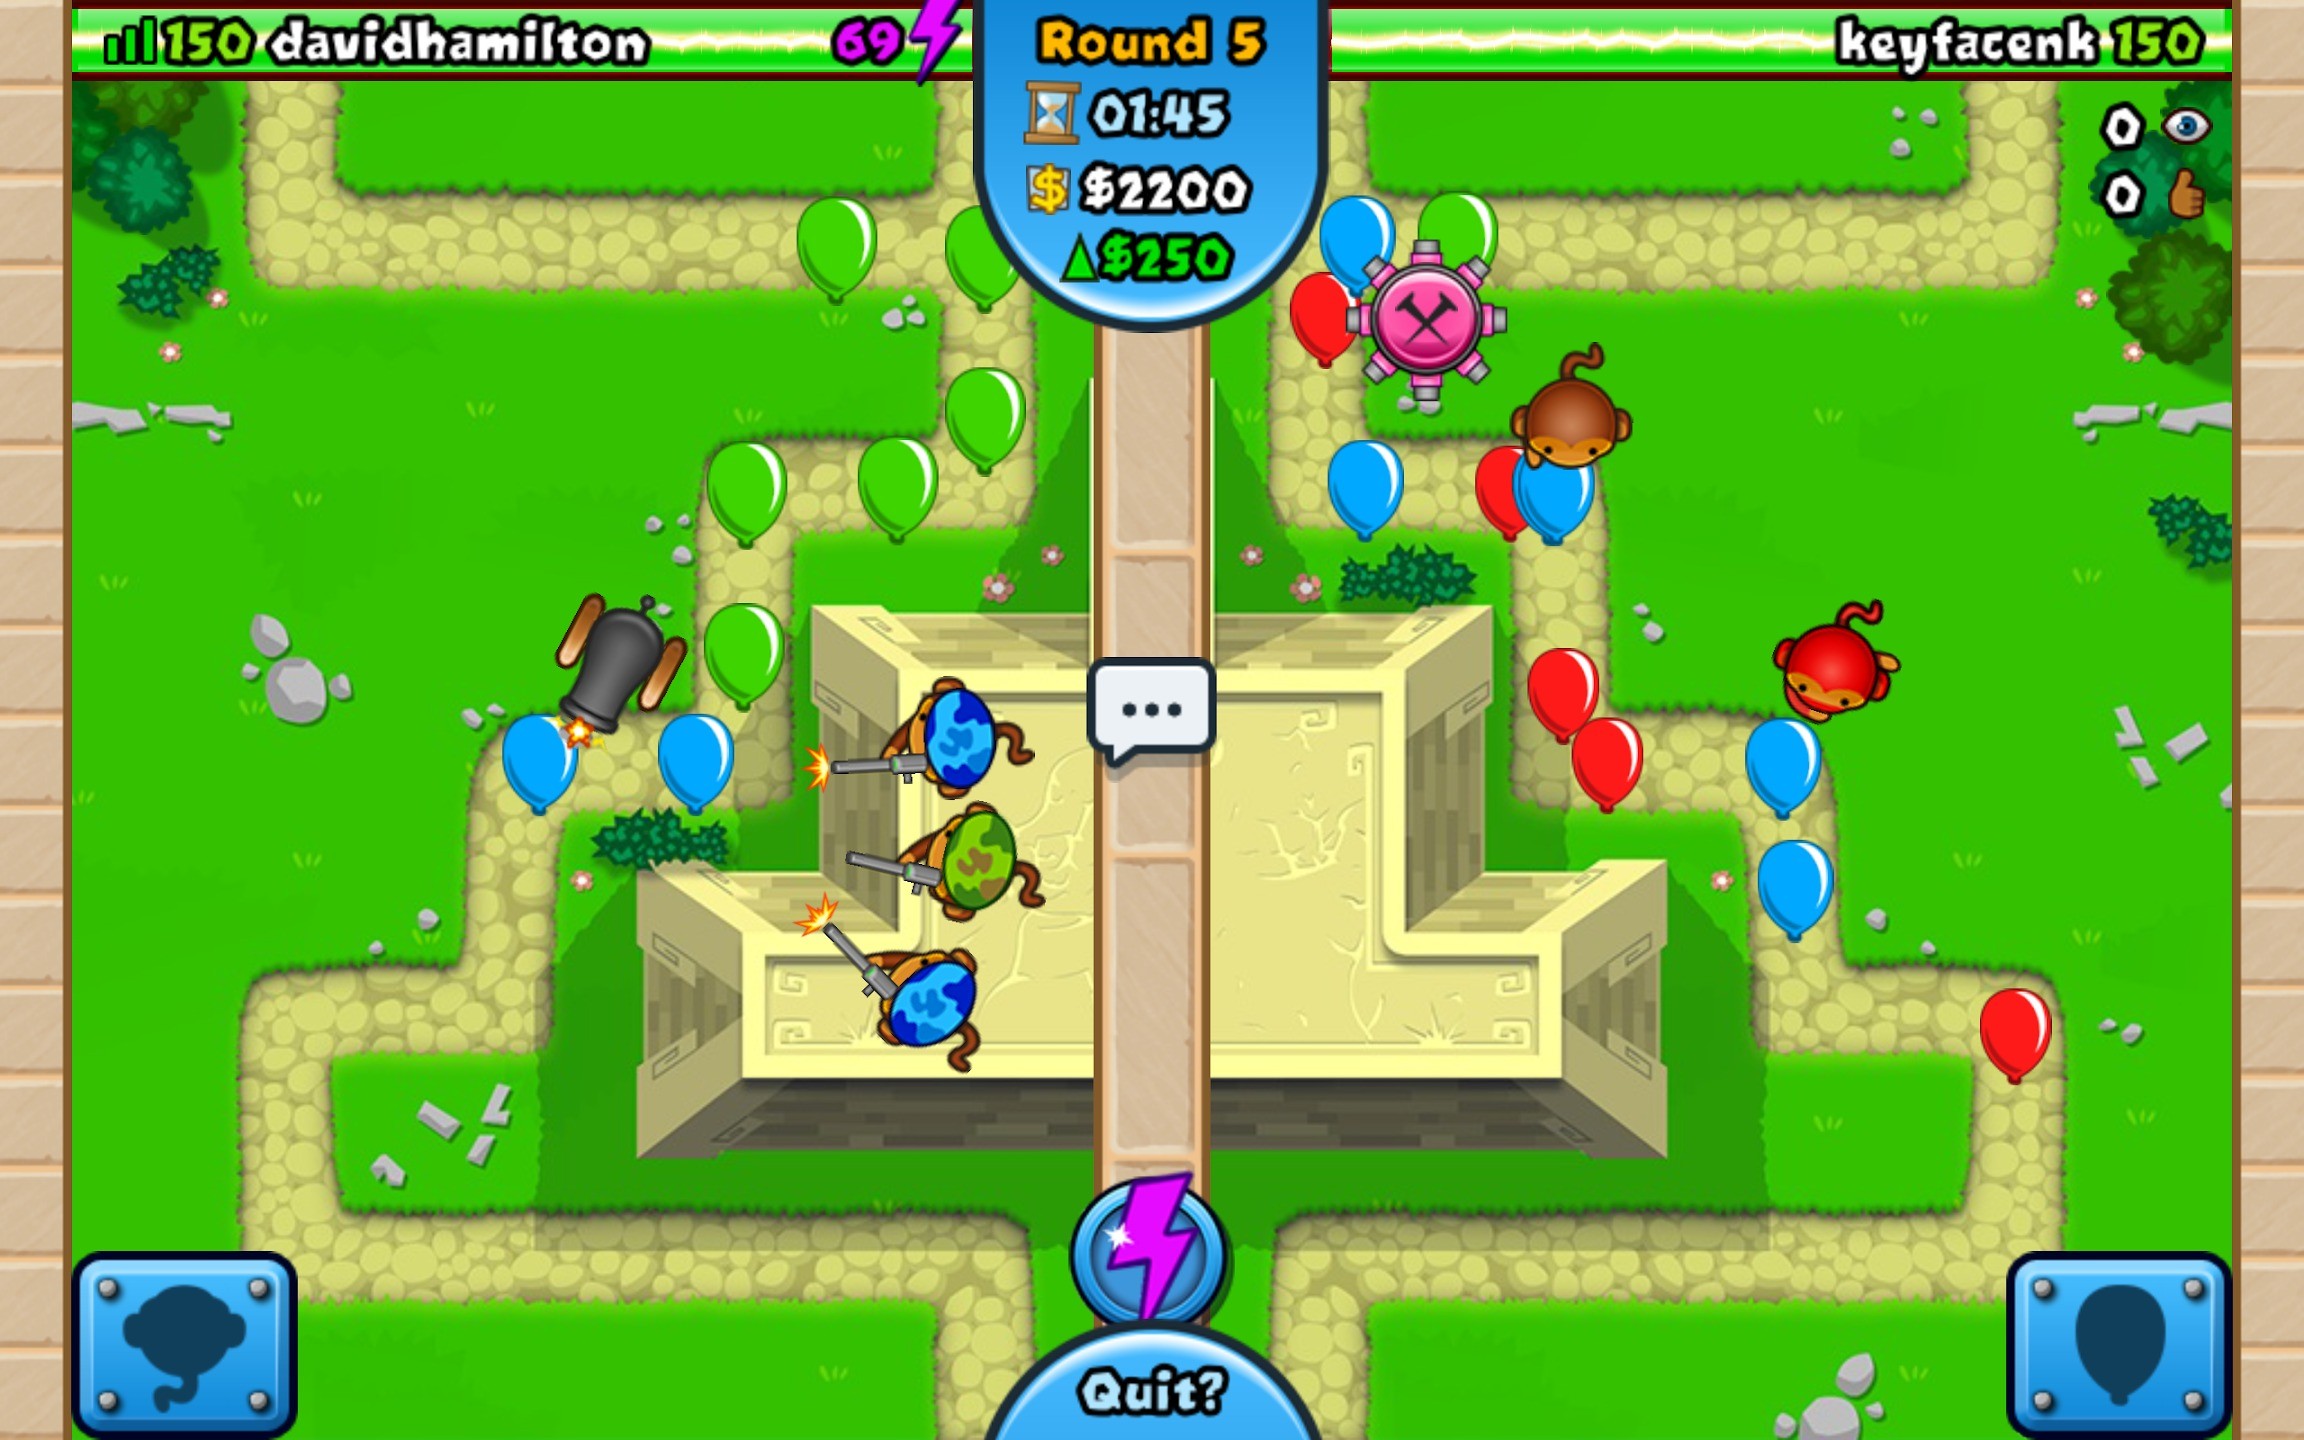 Top 10 Android Tower Defence Games